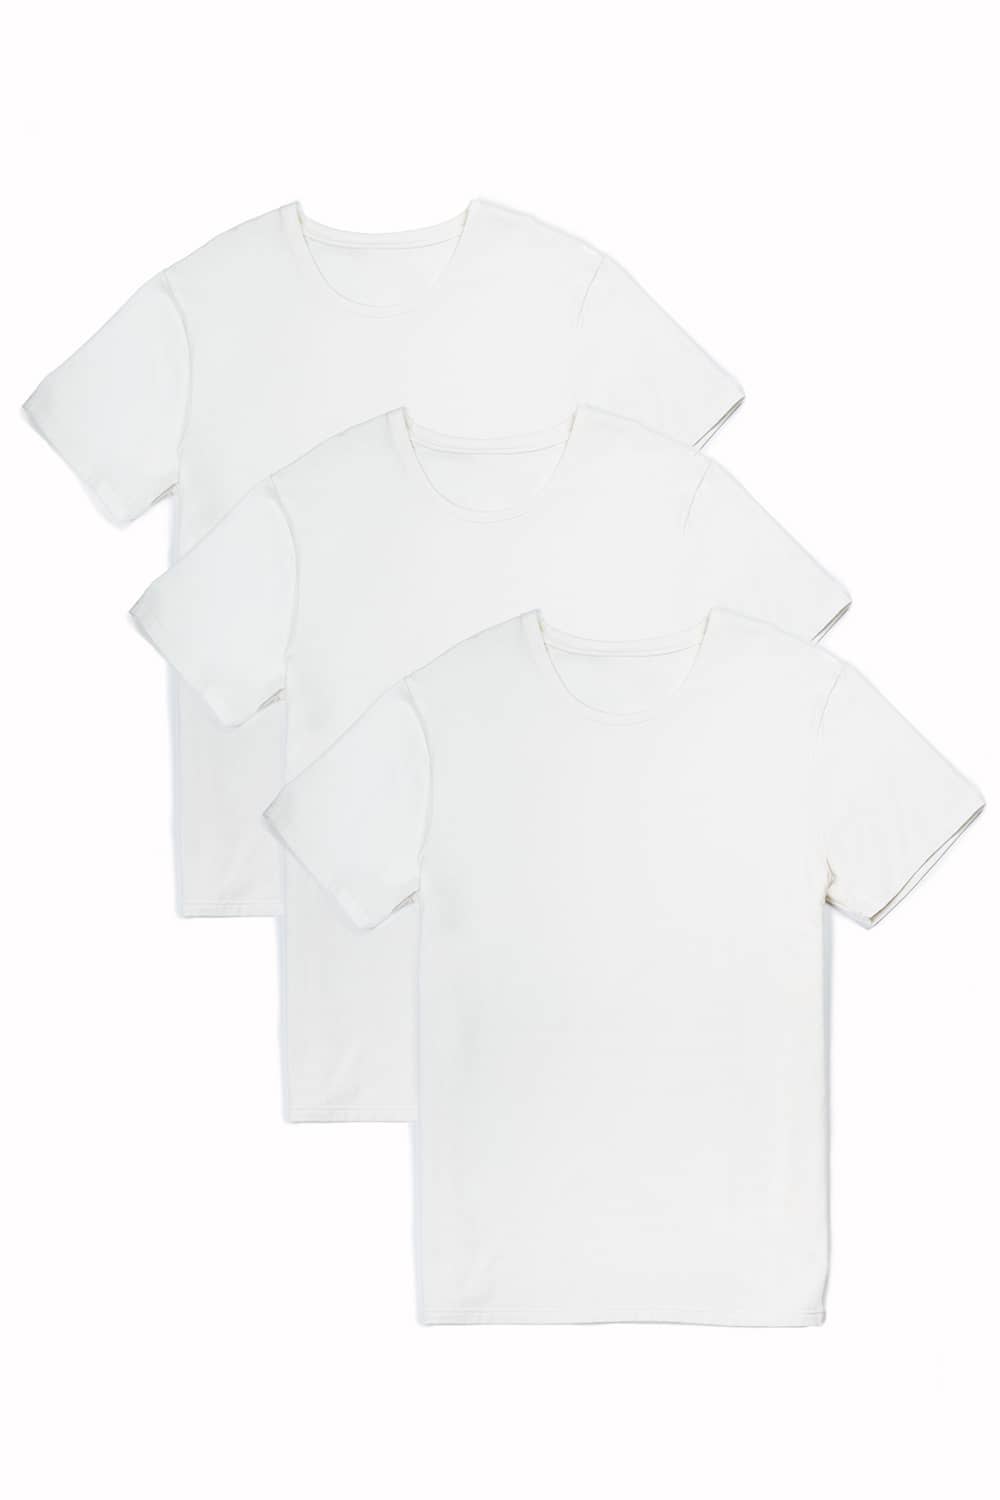 Men's Classic Fit Soft Stretch Crew Neck Undershirt Mens>Casual>Tops Fishers Finery White Small 3 Pack